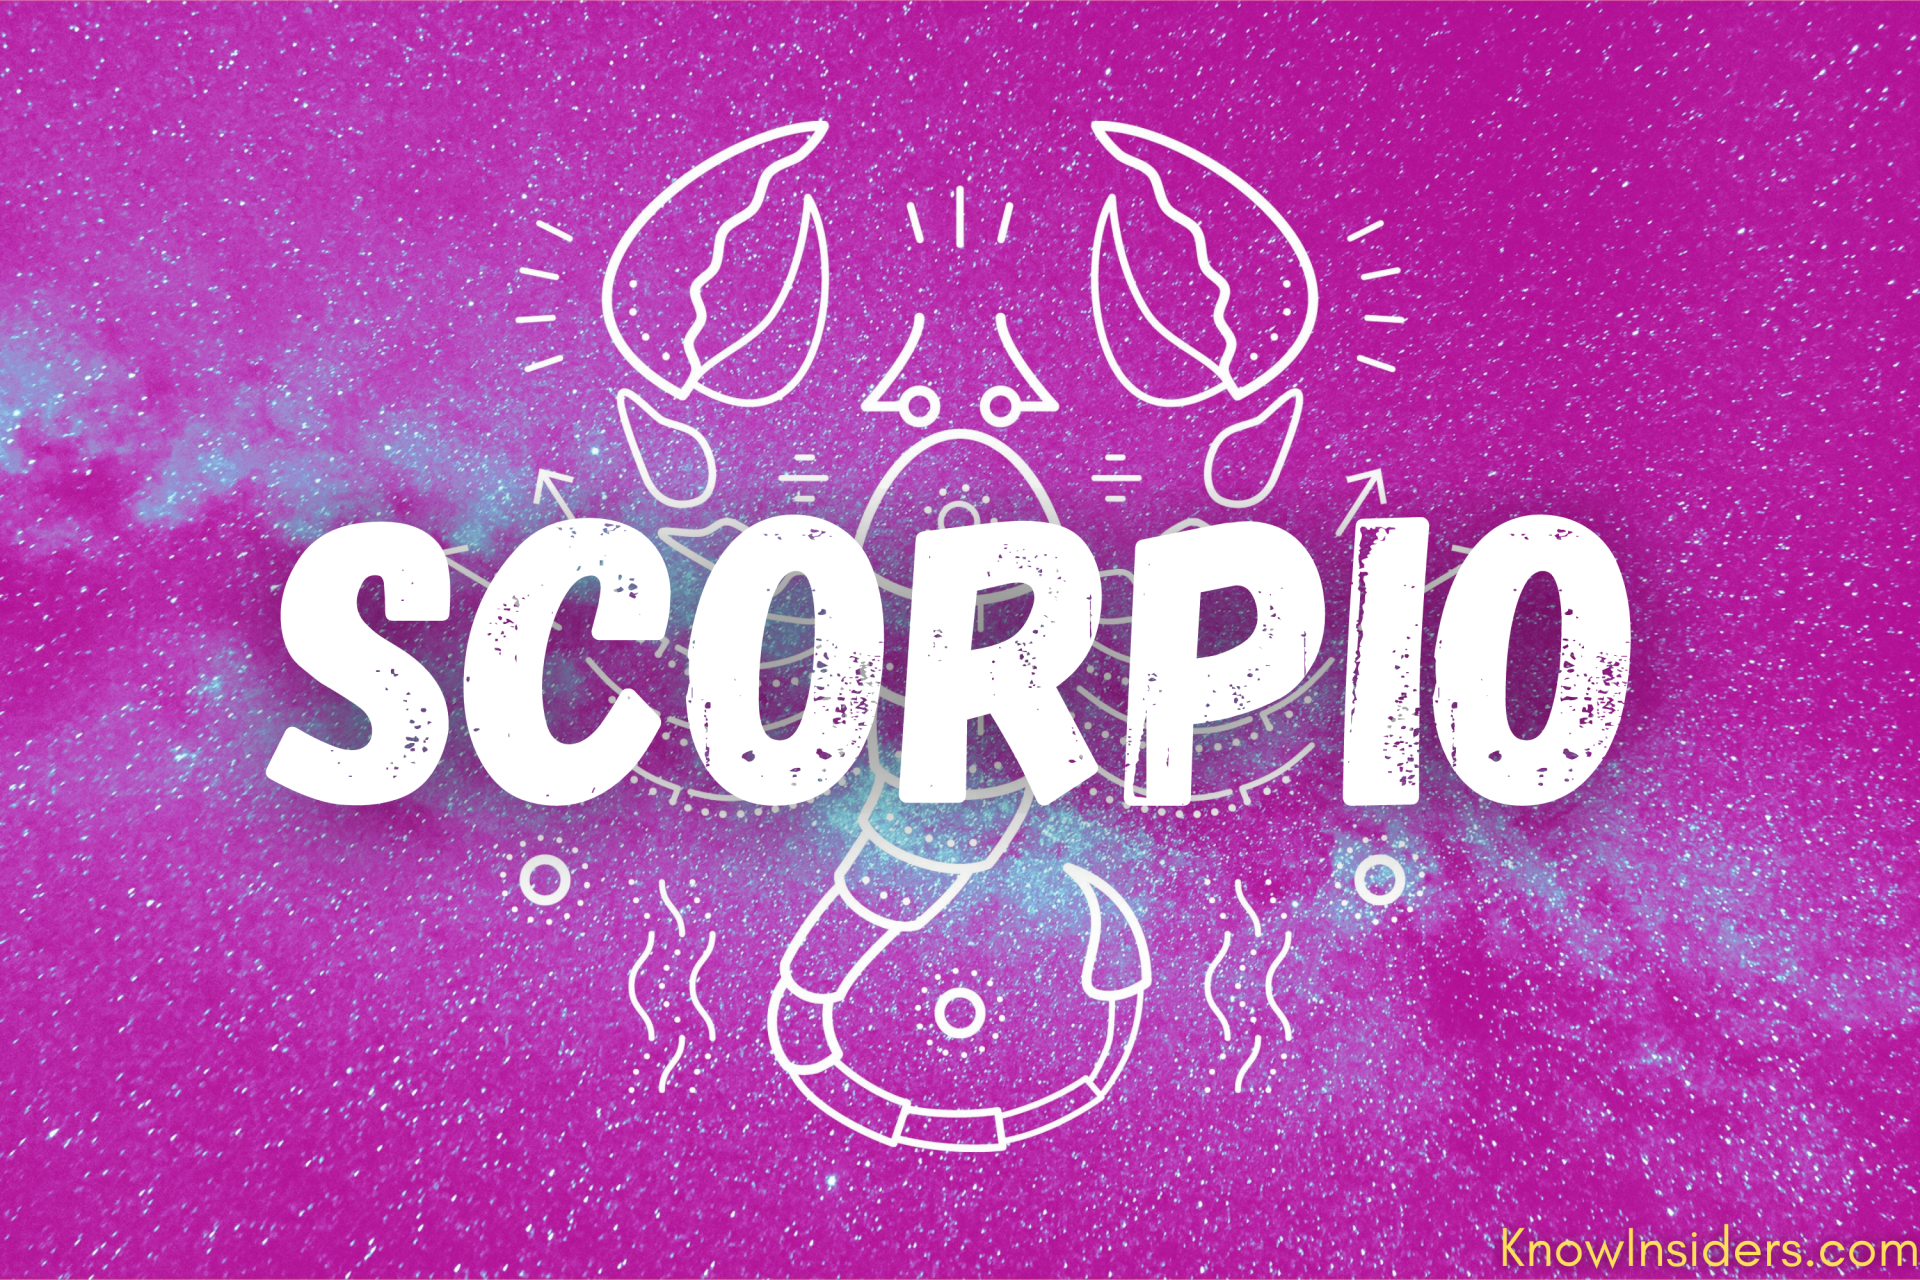 SCORPIO Horoscope July 2021 - Monthly Predictions for Love, Money, Career and Health